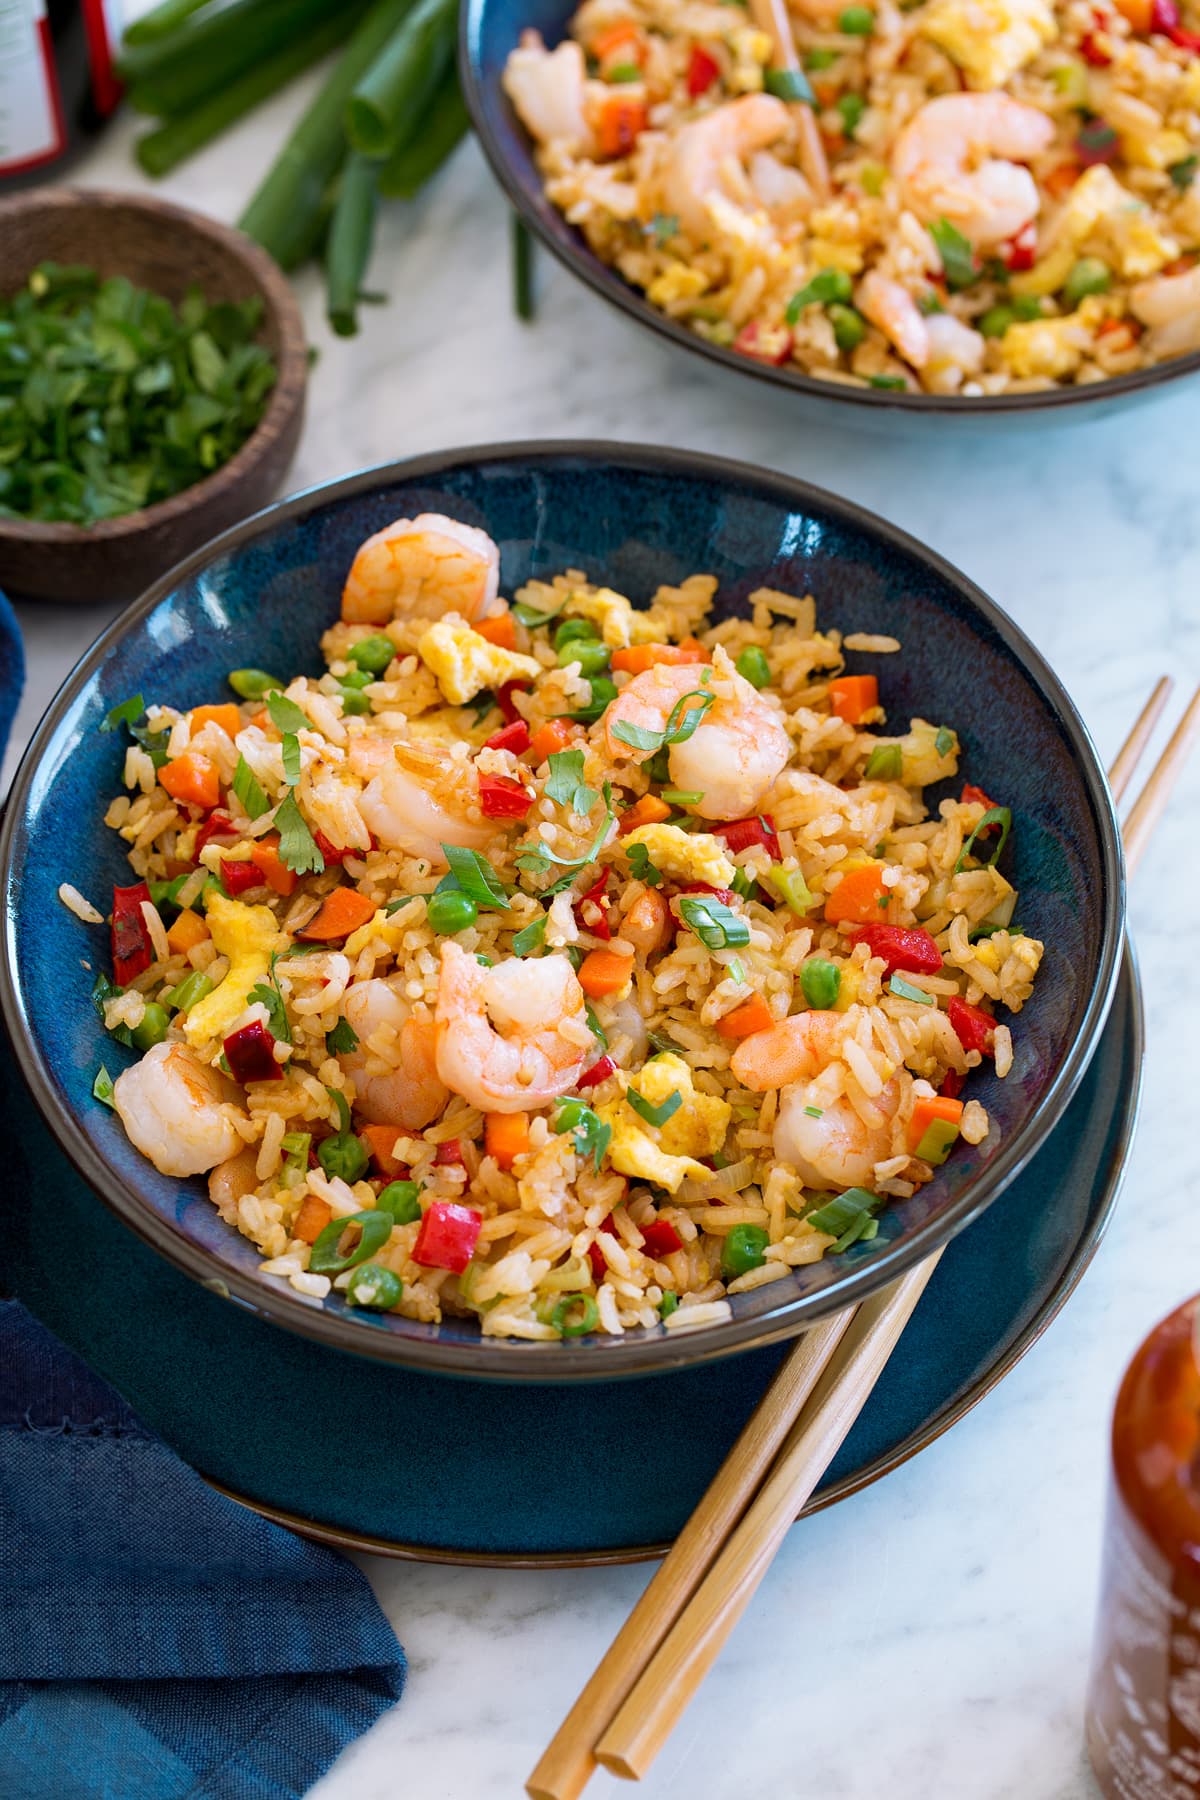 Two servings of shrimp fried rice shown in blue bowls with chopsticks.